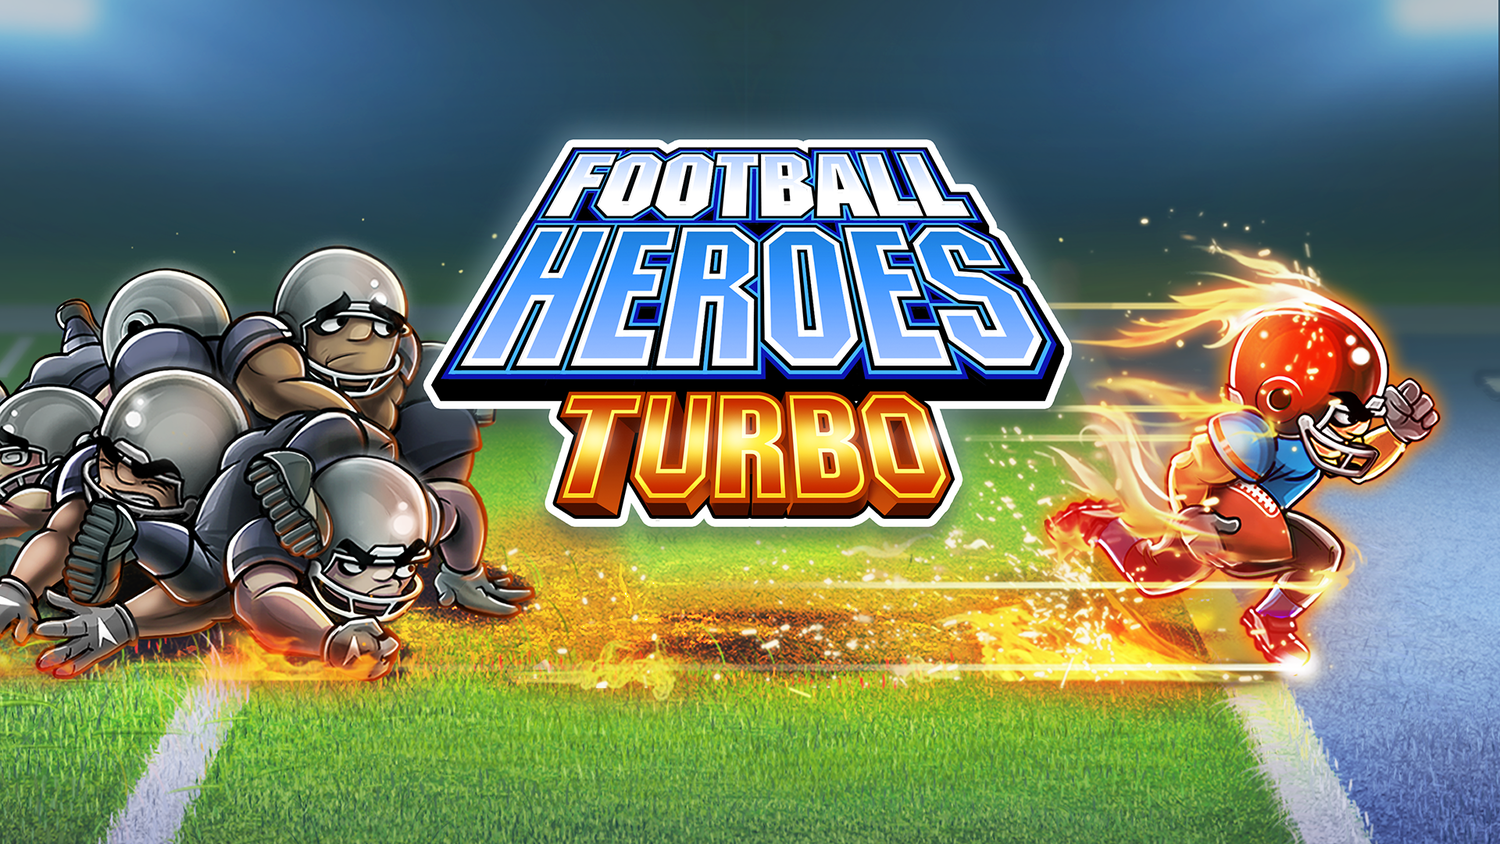 Online Football Arcade Game To Launch This Fall –